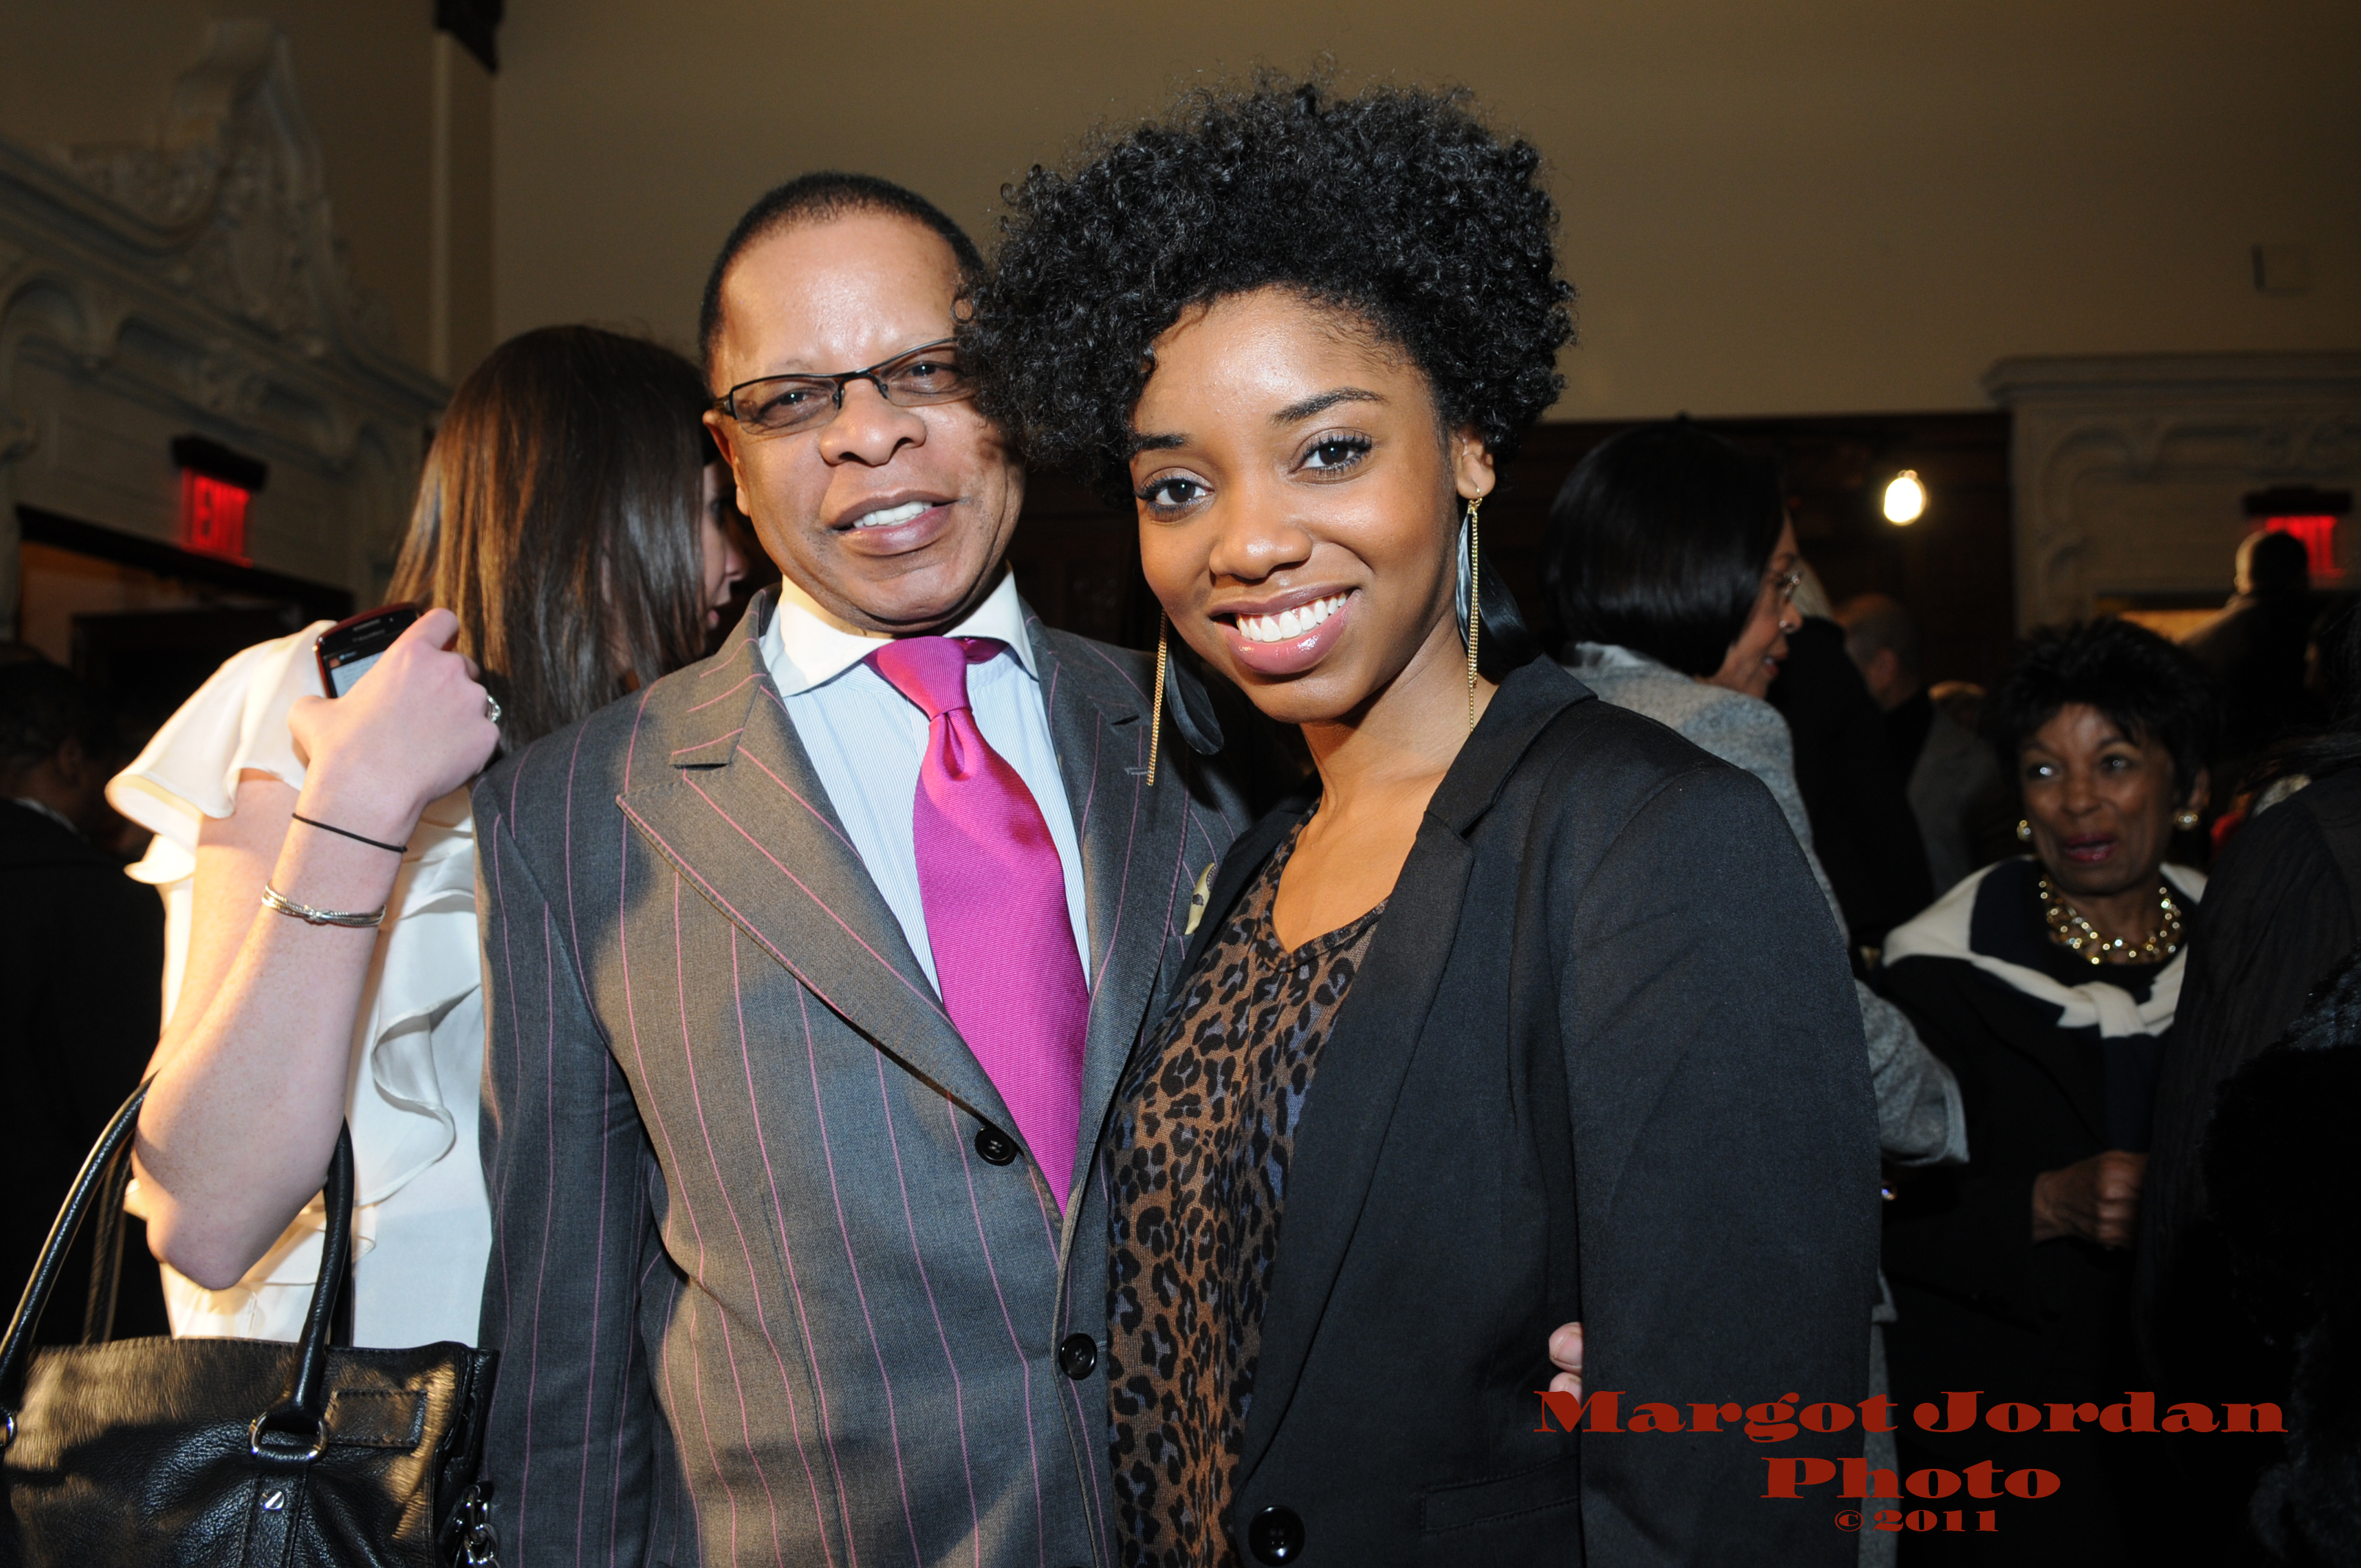 With Broadway Producer, Stephen Byrd at B. Michael Fashion Show